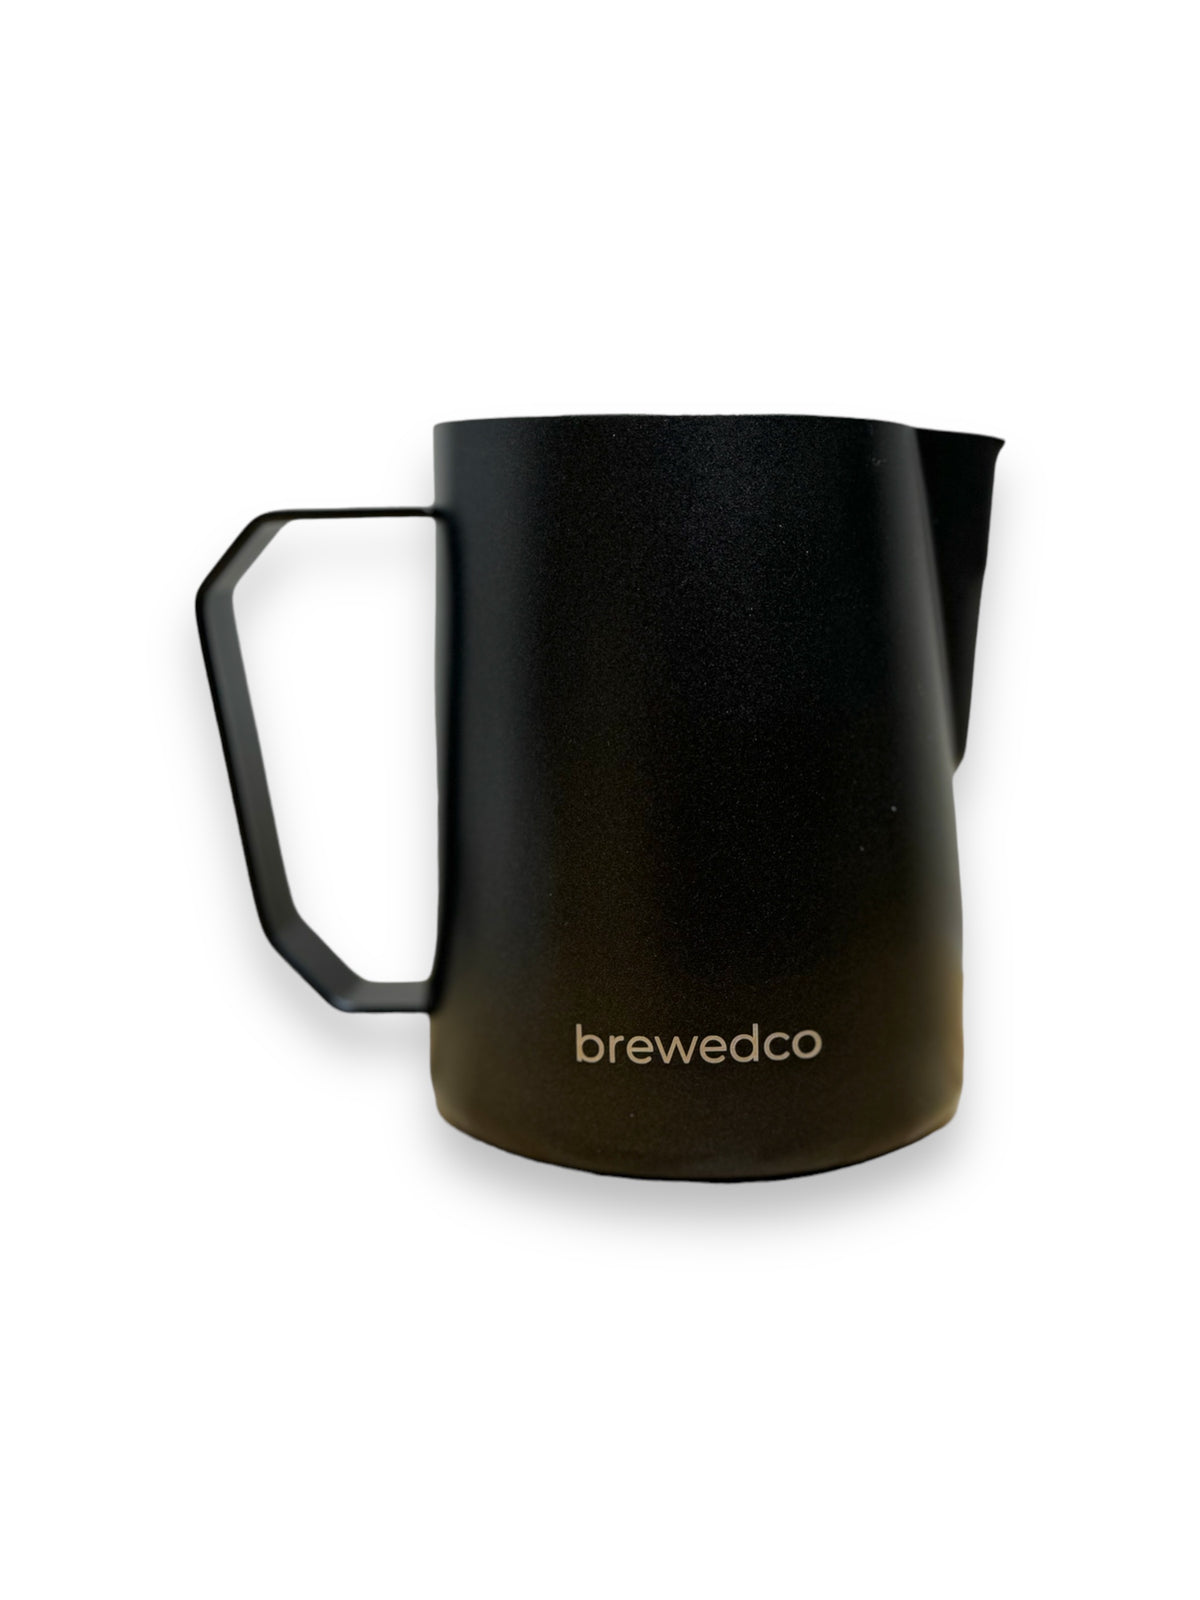 Brewedco Milk Pitcher that incorporates a sharp spout for pouring latte art